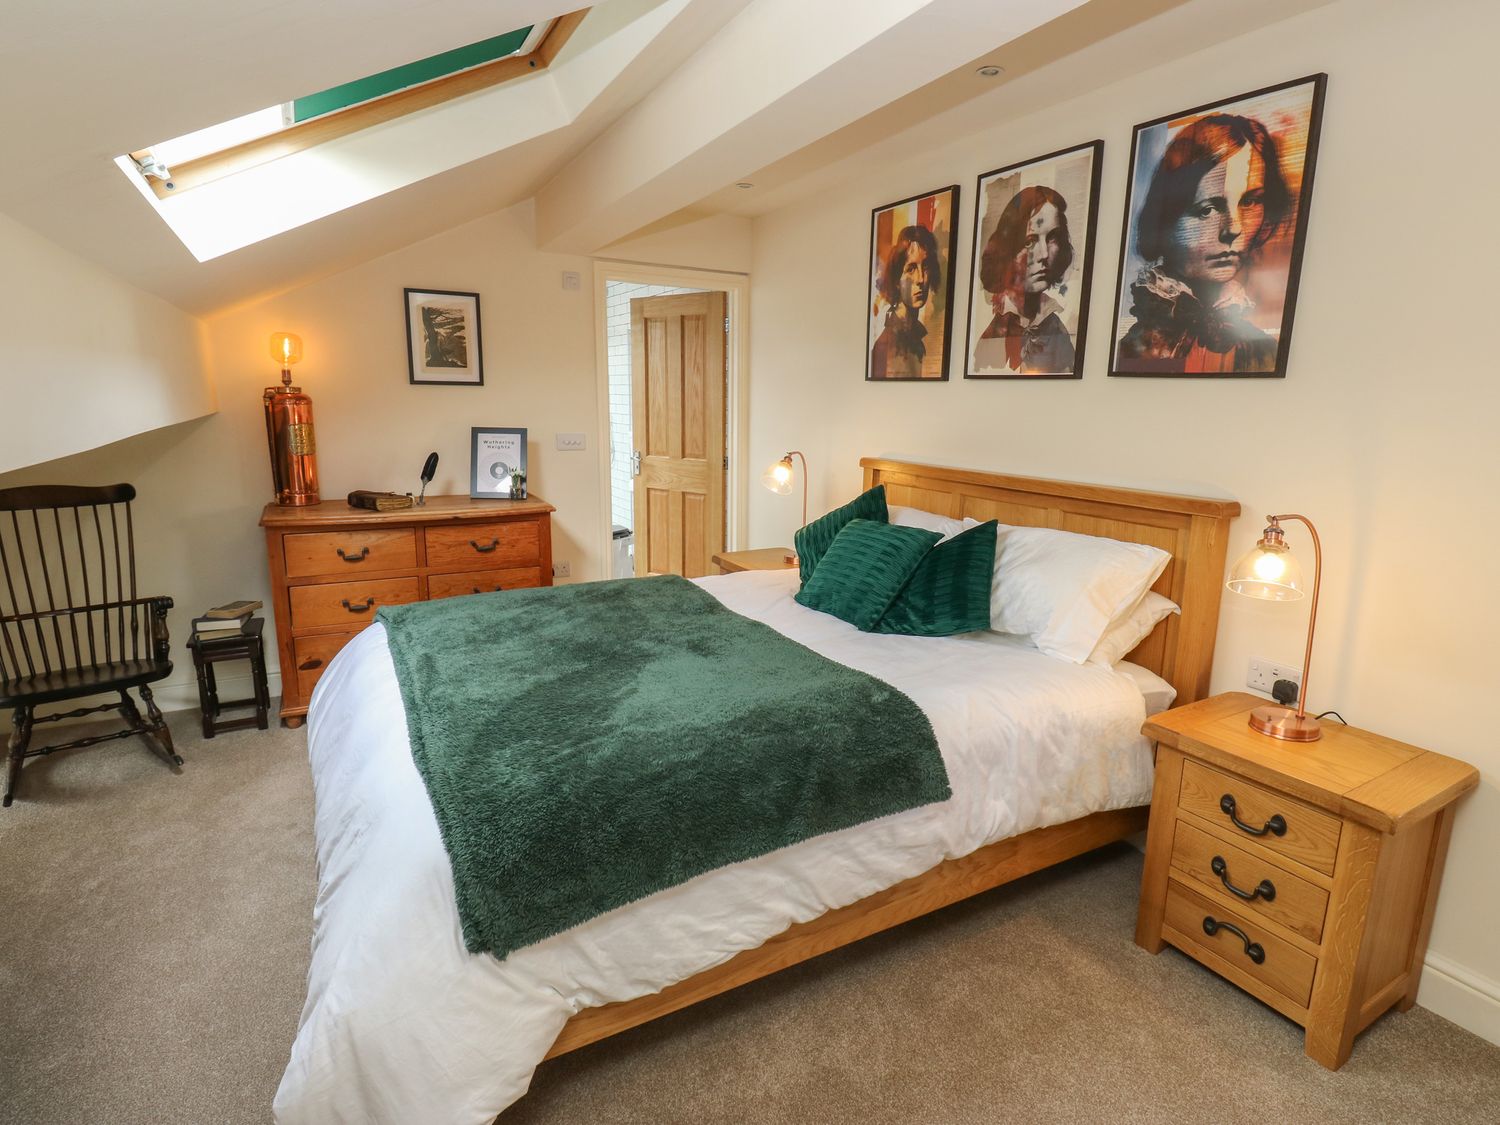 Lee House Farm, Halifax, Yorkshire. Bedrooms with en-suites. Countryside views. Near a National Park